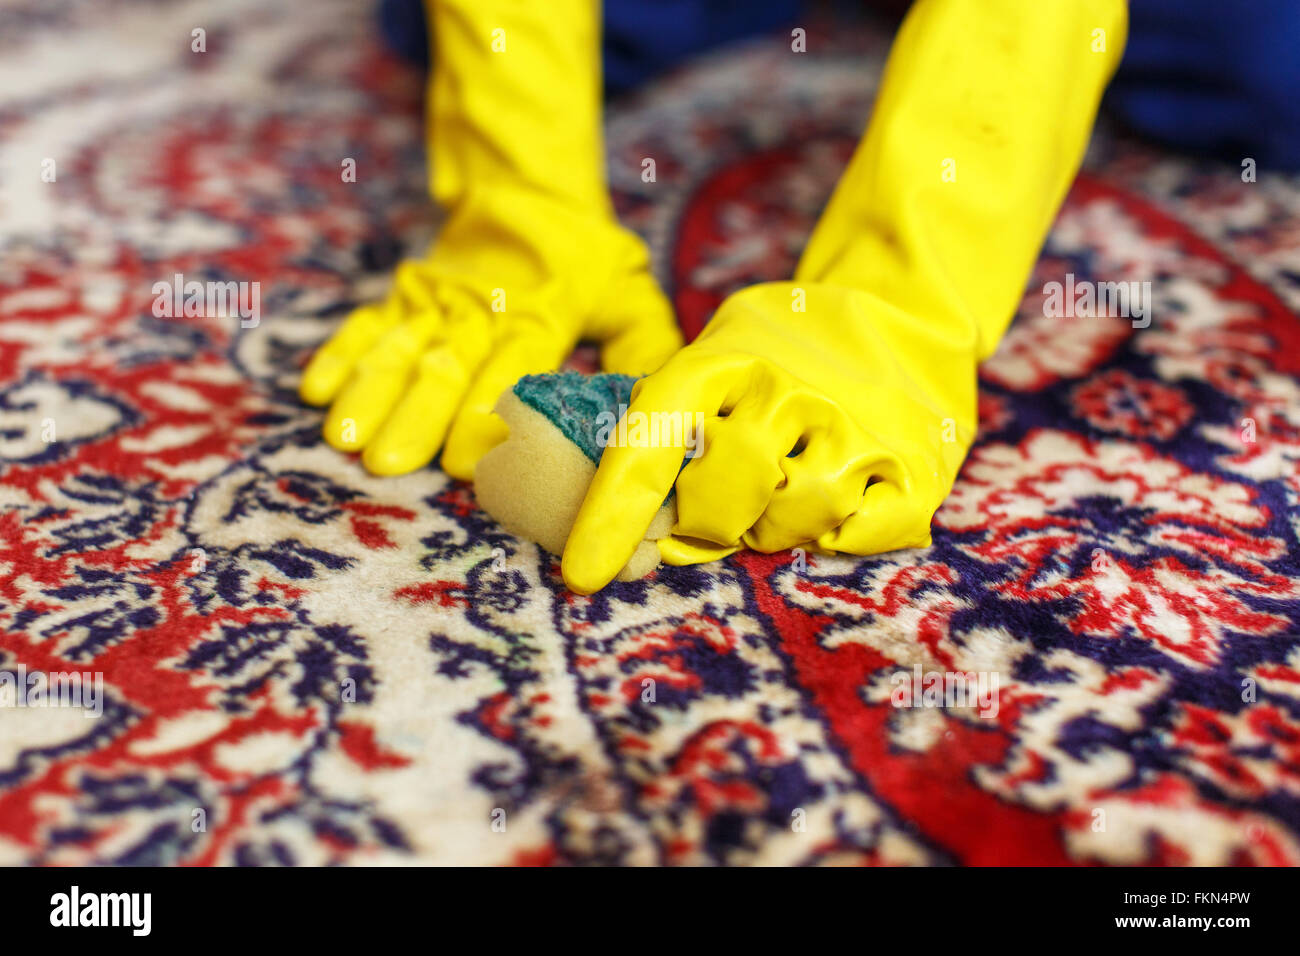 Kid cleaning carpet in yellow rubber gloves Stock Photo